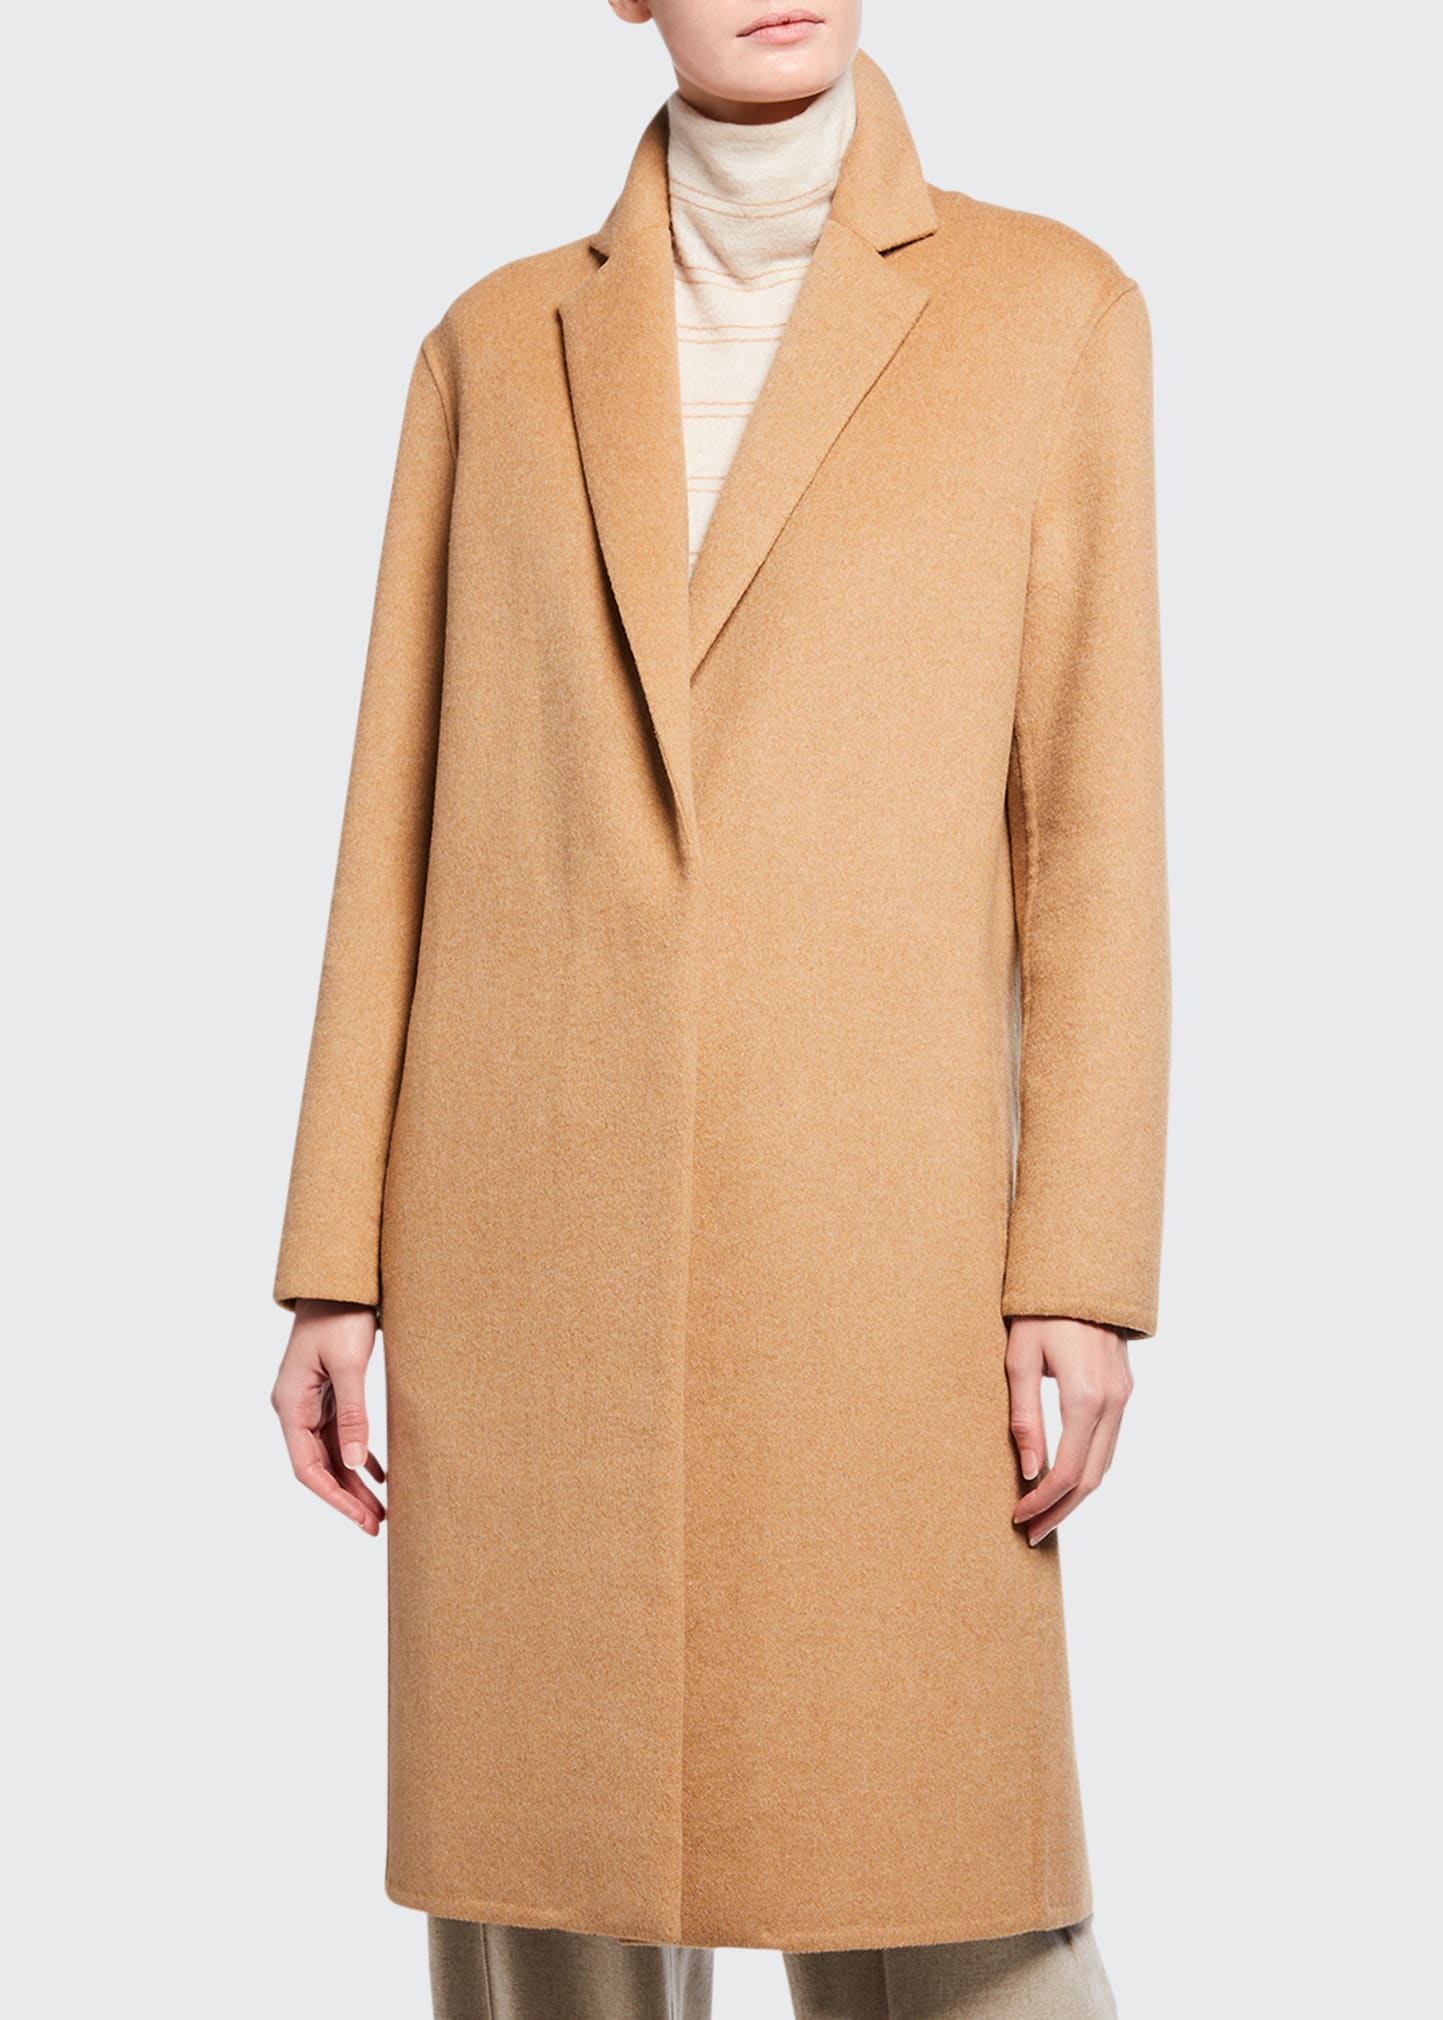 Vince Wool-Blend Single-Breasted Classic Coat